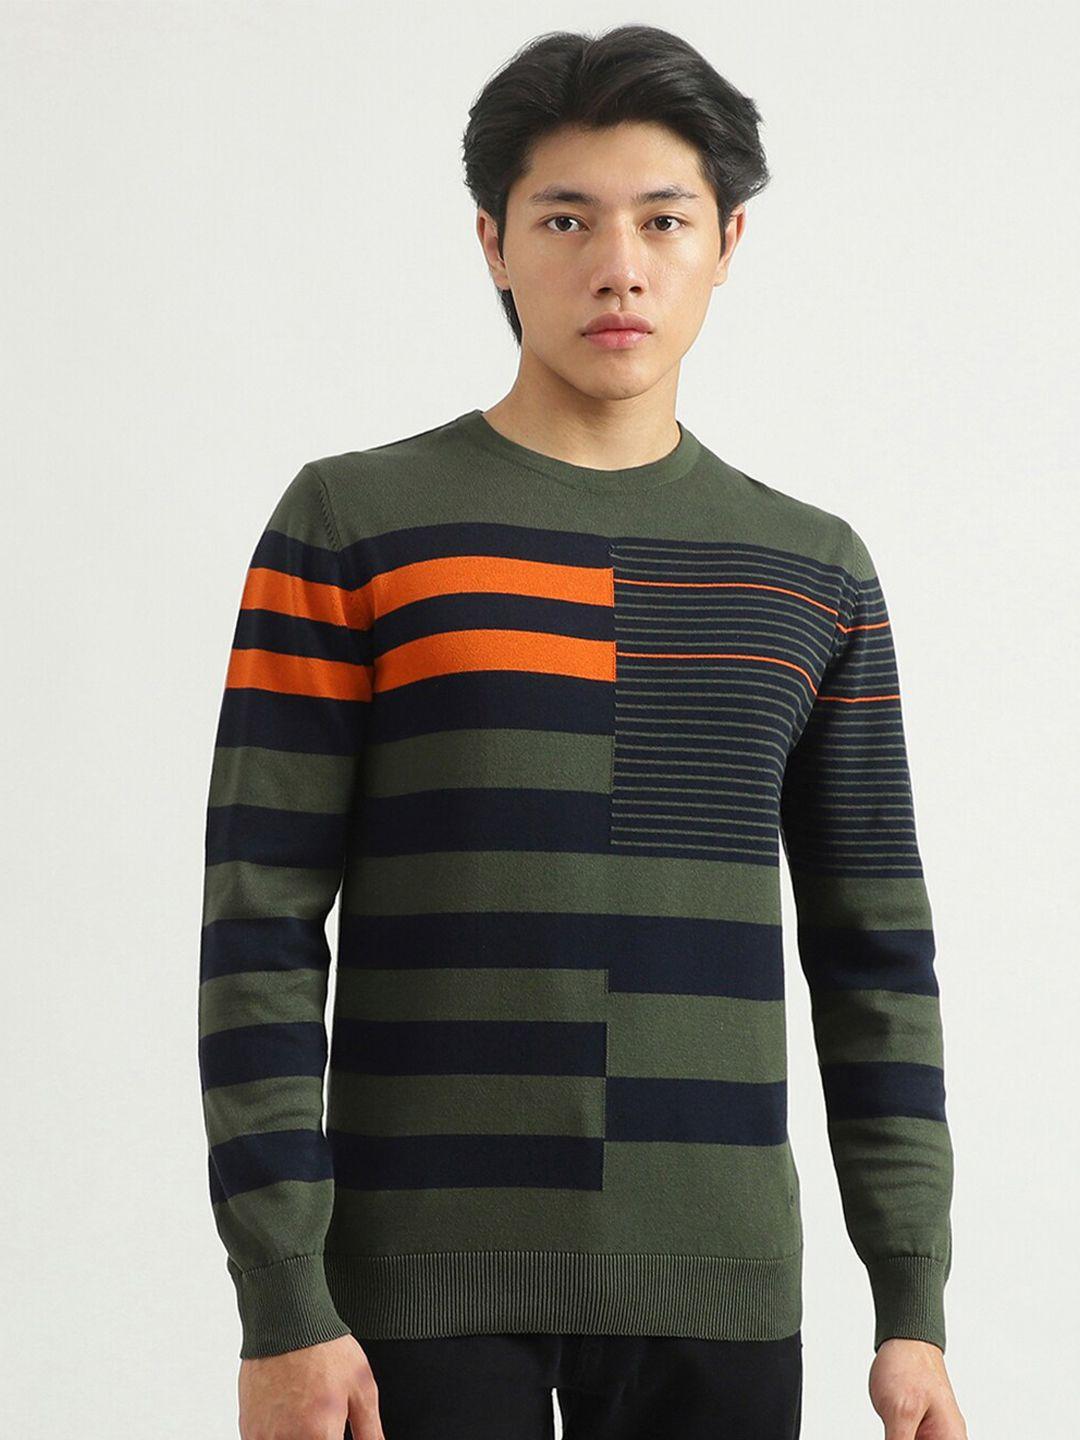 united colors of benetton men olive green and navy blue striped cotton pullover sweater